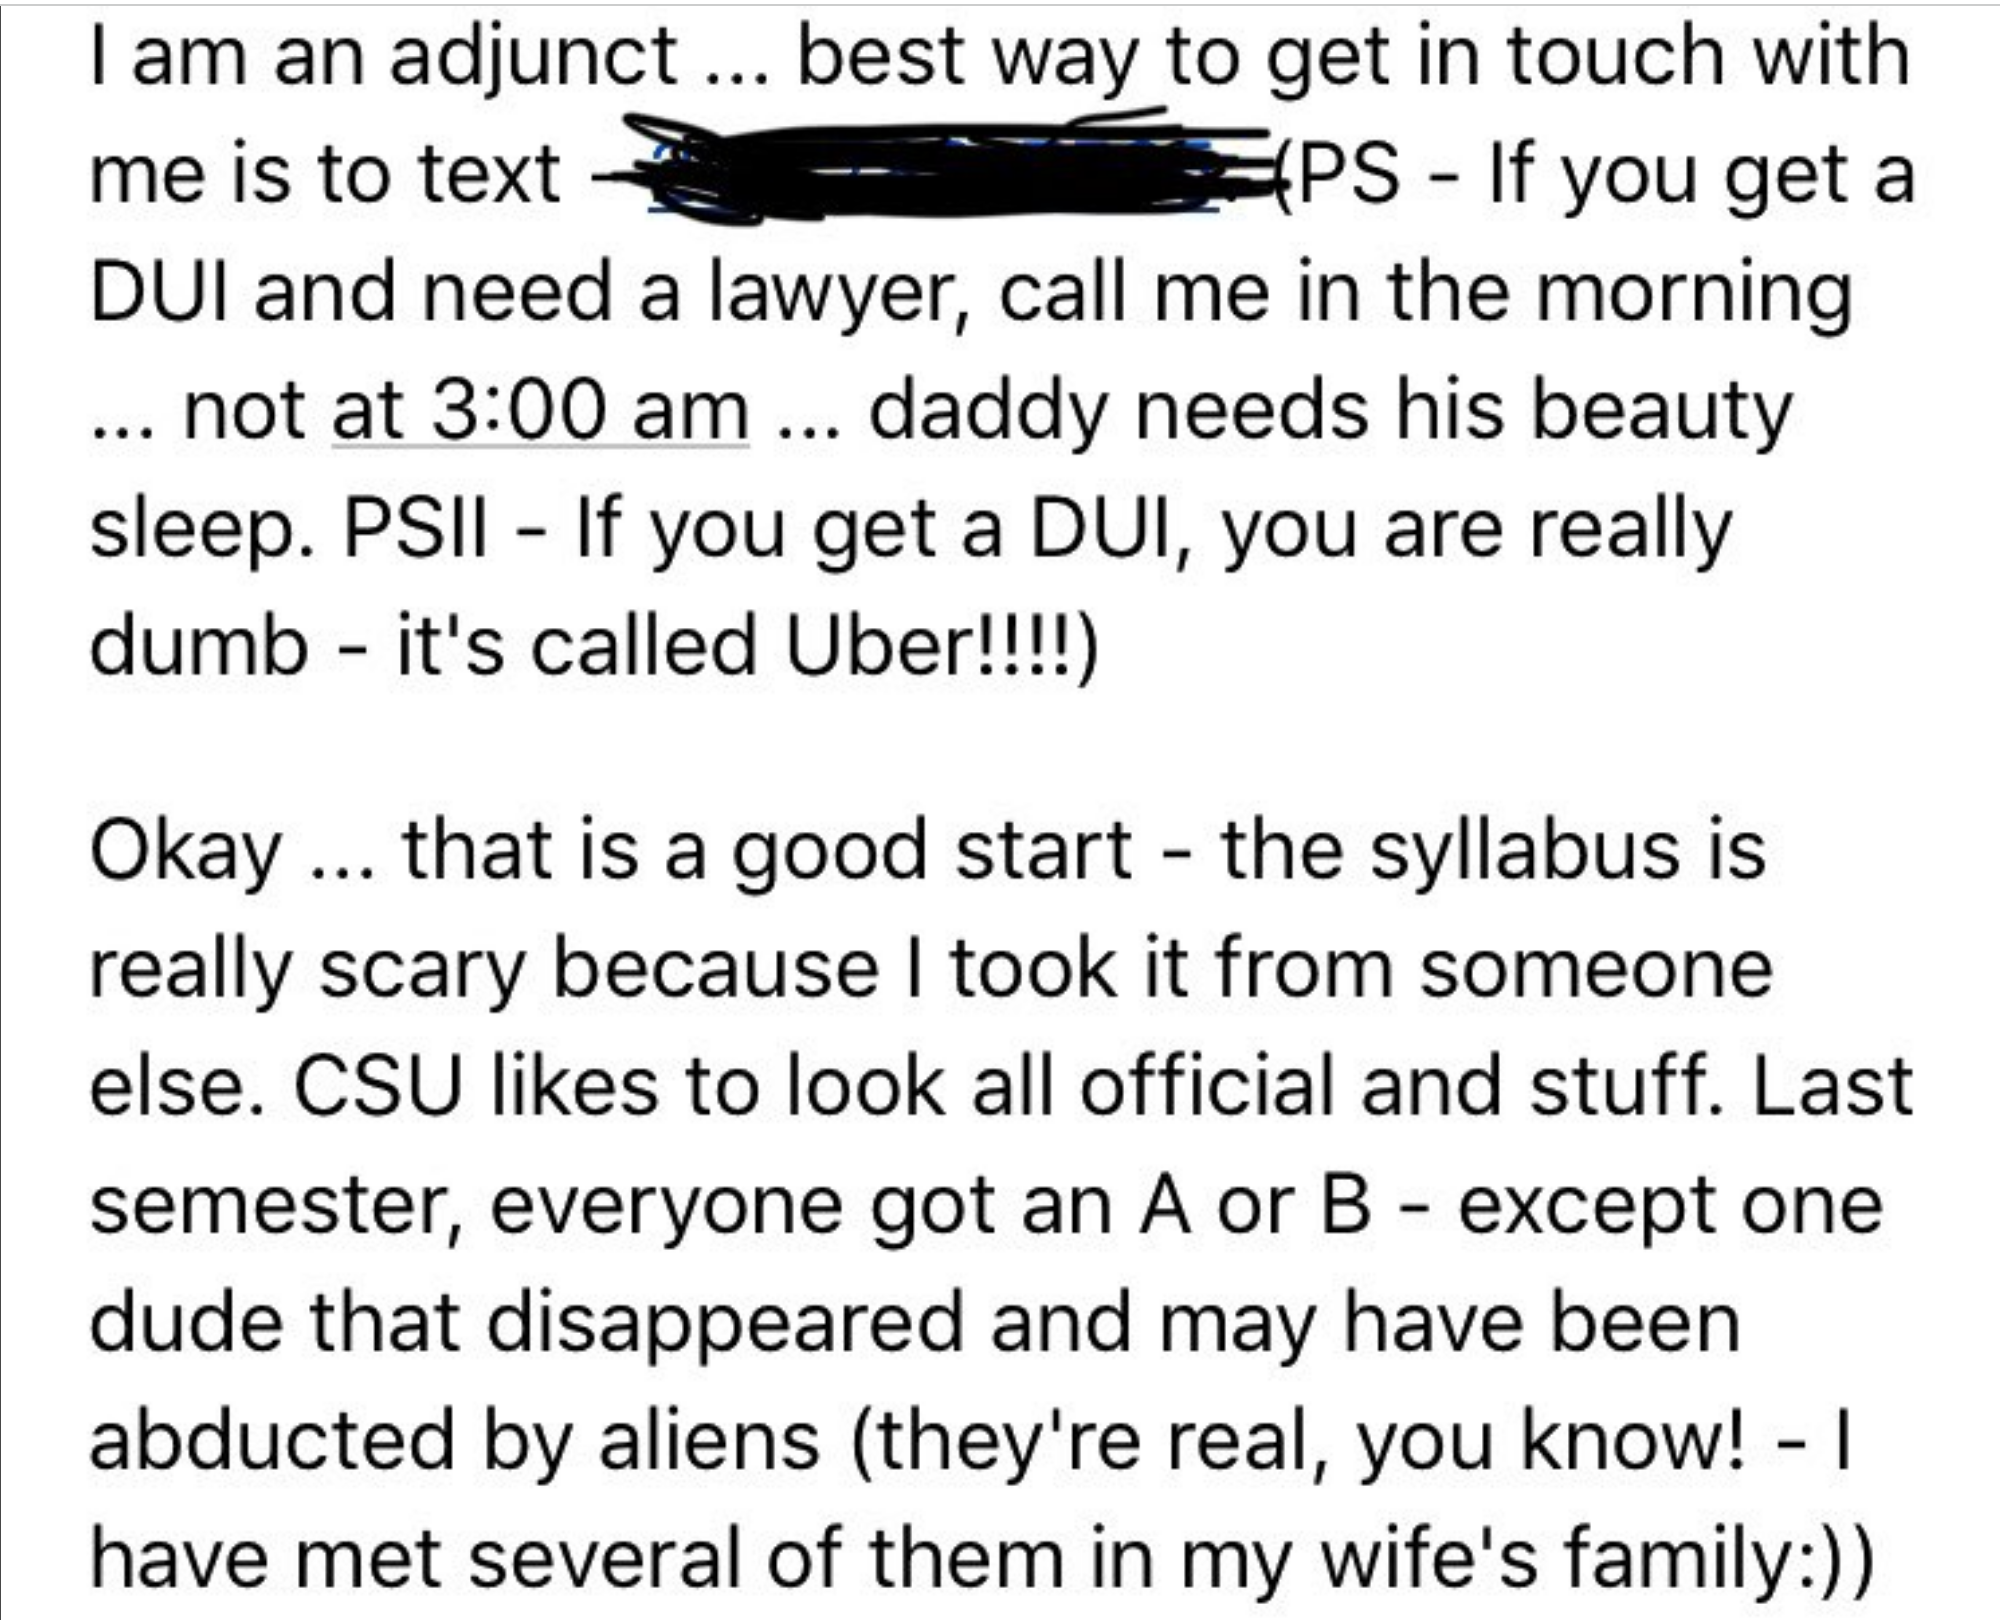 &quot;the syllabus is really scary because I took it from someone else.&quot;